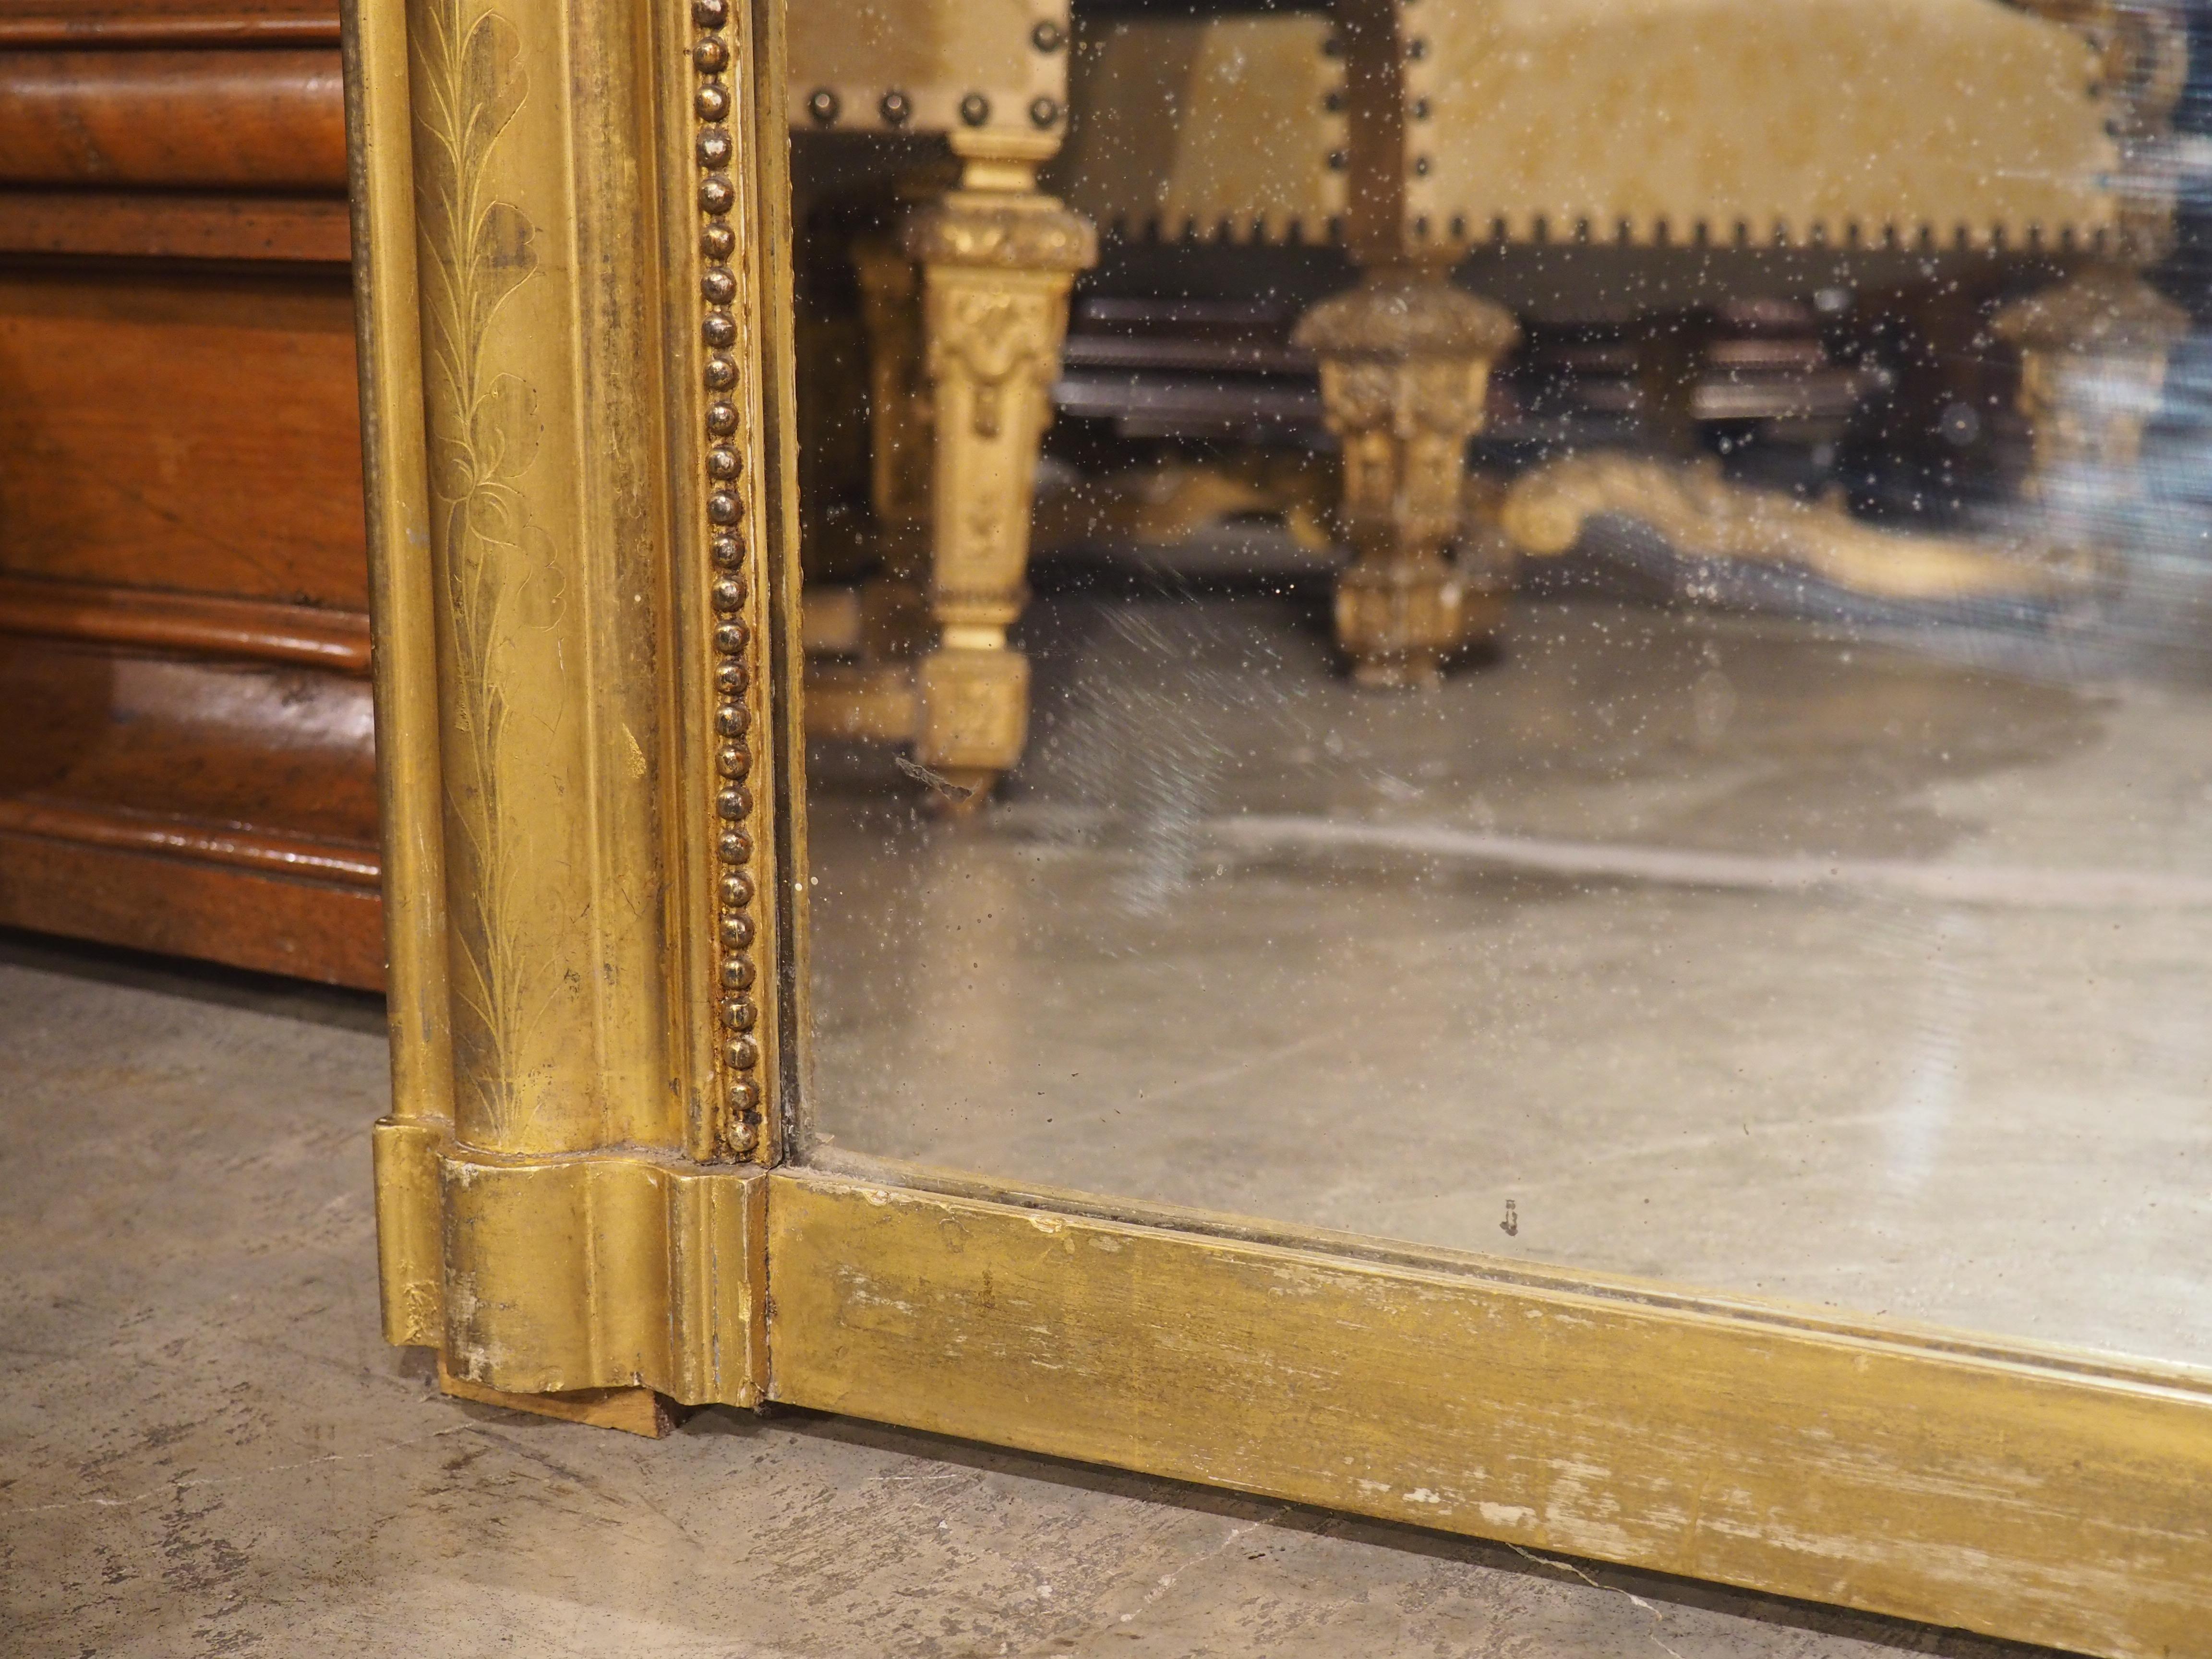 Louis Philippe mirrors are known for their rounded top corners and subtle embellishments to the frame. In the 19th century, these types of mirrors were often placed above fireplace mantels in apartments throughout Paris. Due to its size, our French